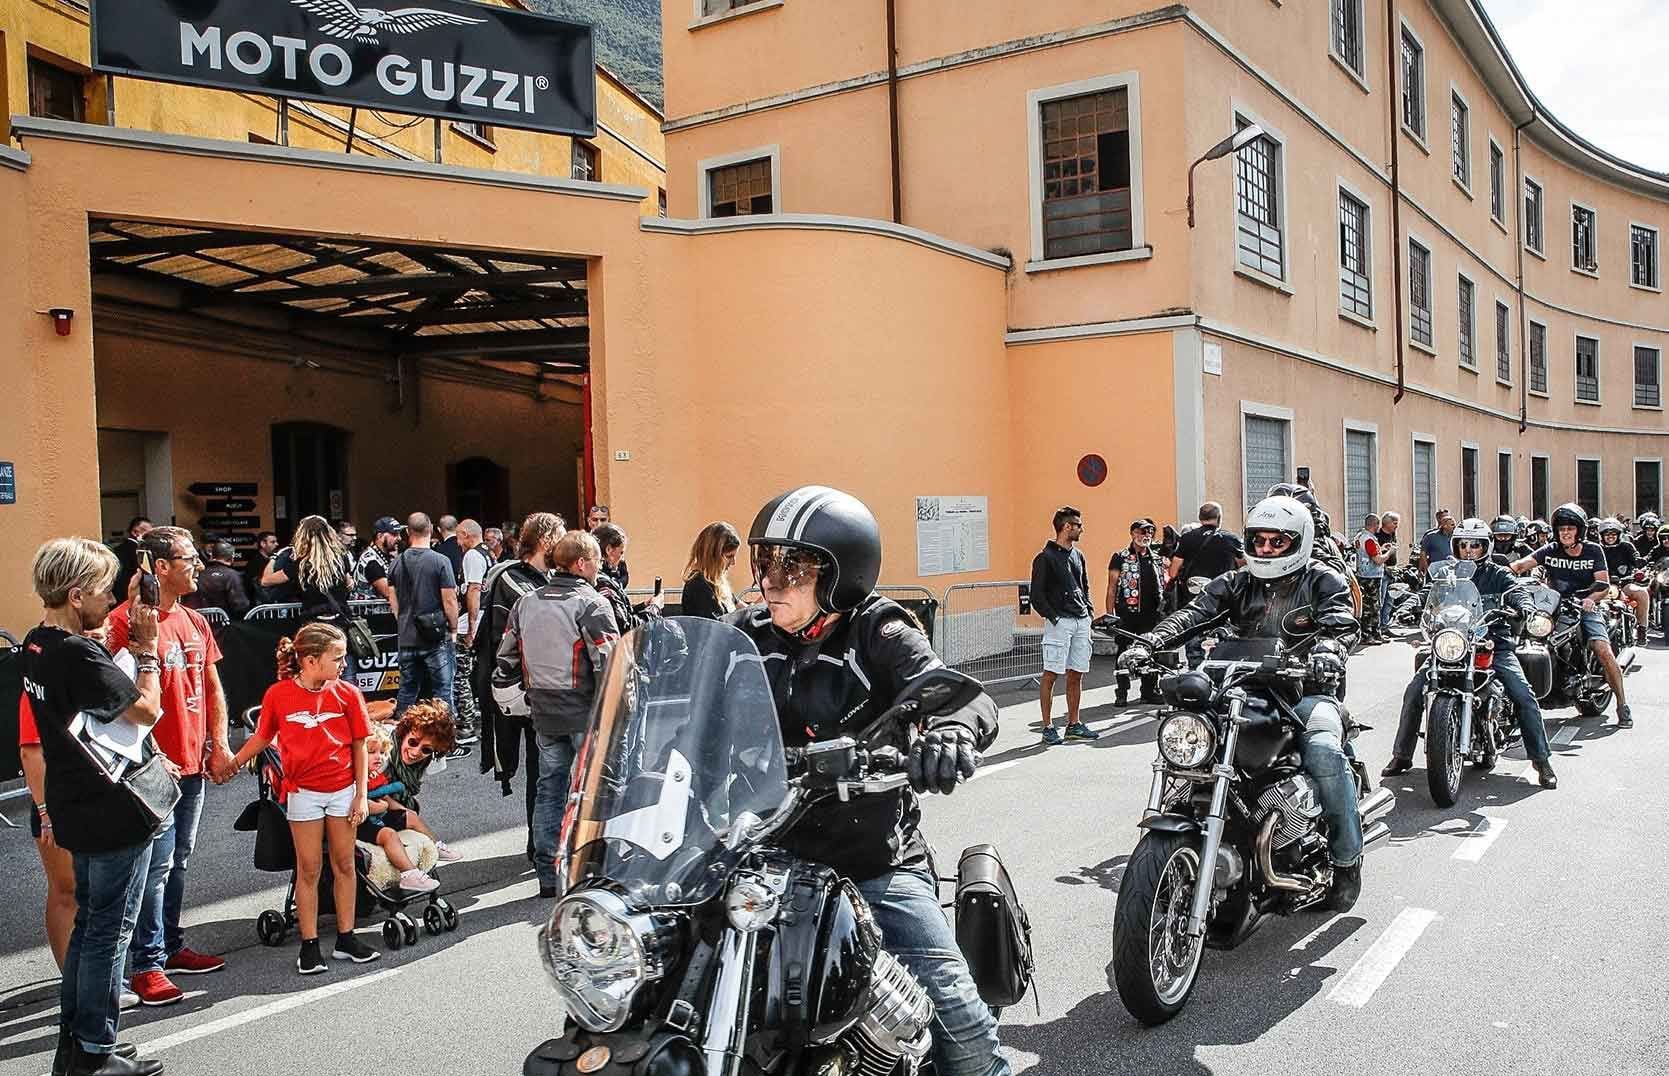 Thousands of Guzzi fans took to the streets of Mandello del Lario at this year's Moto Guzzi Earth Days to celebrate the previously postponed 100th anniversary.